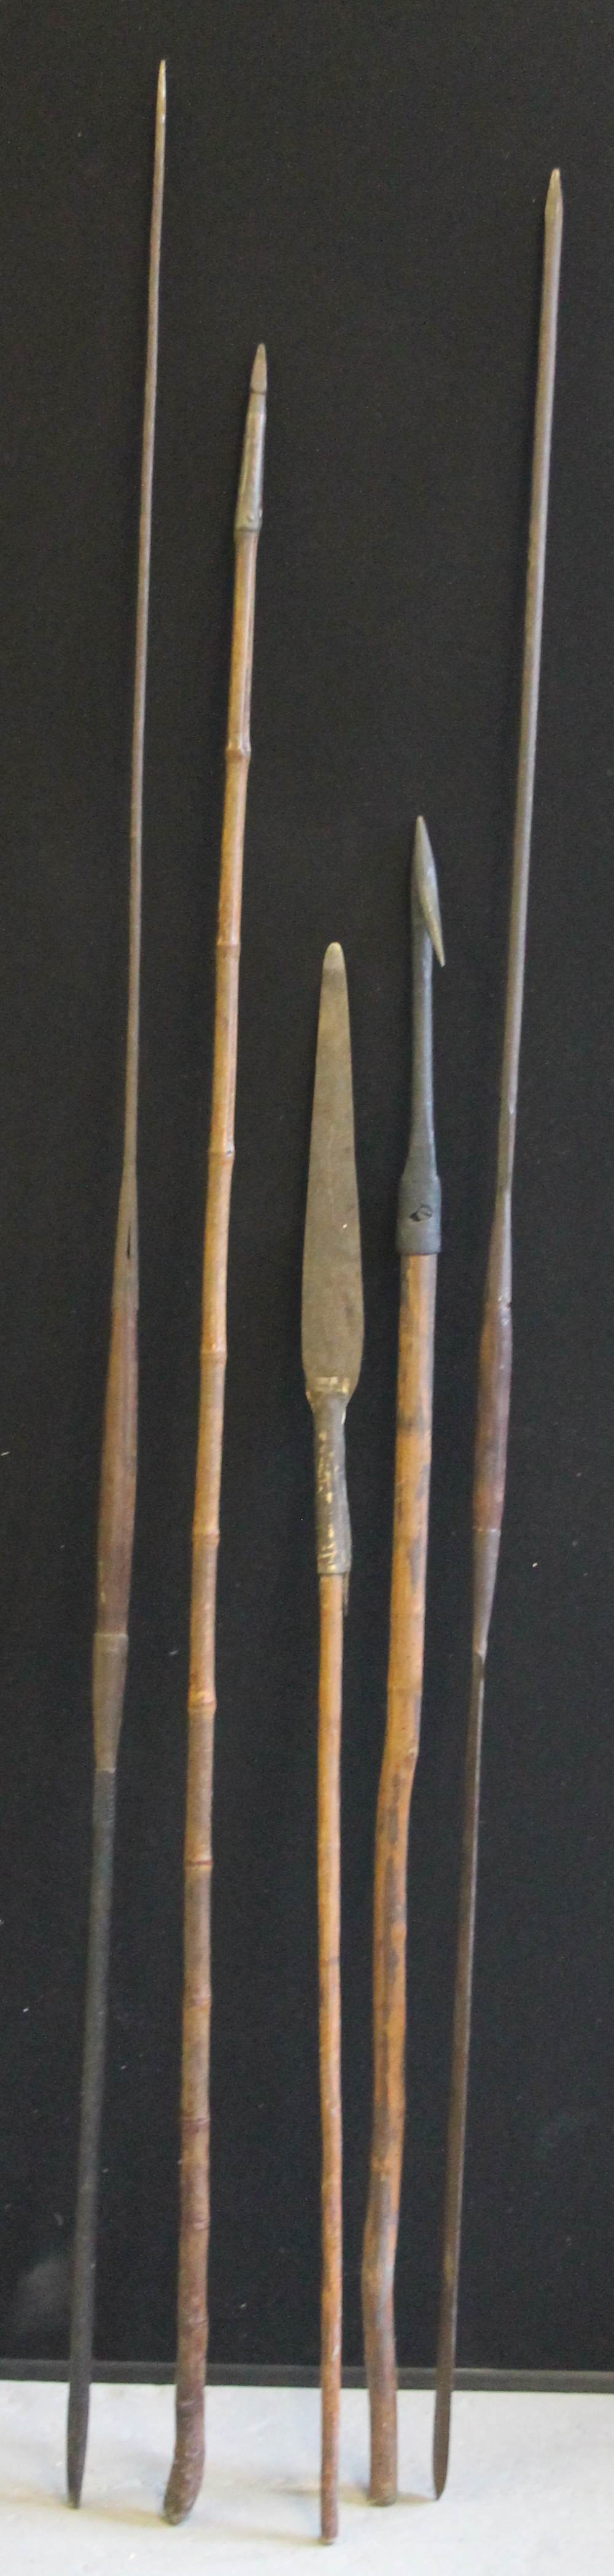 SPEARS - four hunting spears and a fishing spear.